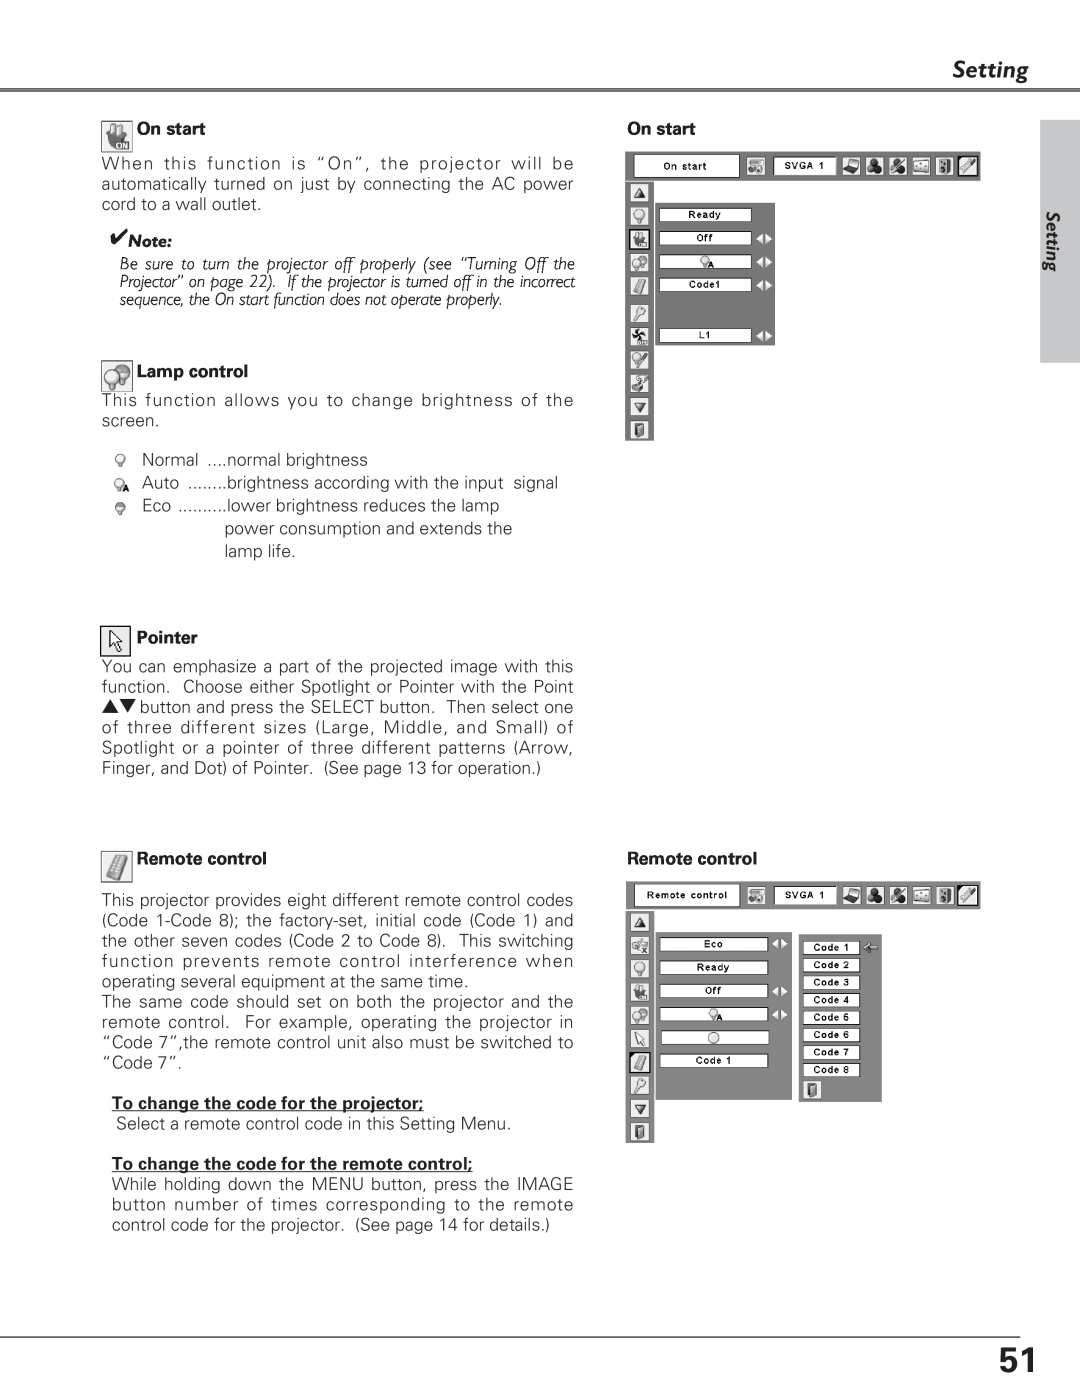 Eiki LC-XB27 owner manual Setting, On start, Lamp control, Pointer, Remote control, To change the code for the projector 